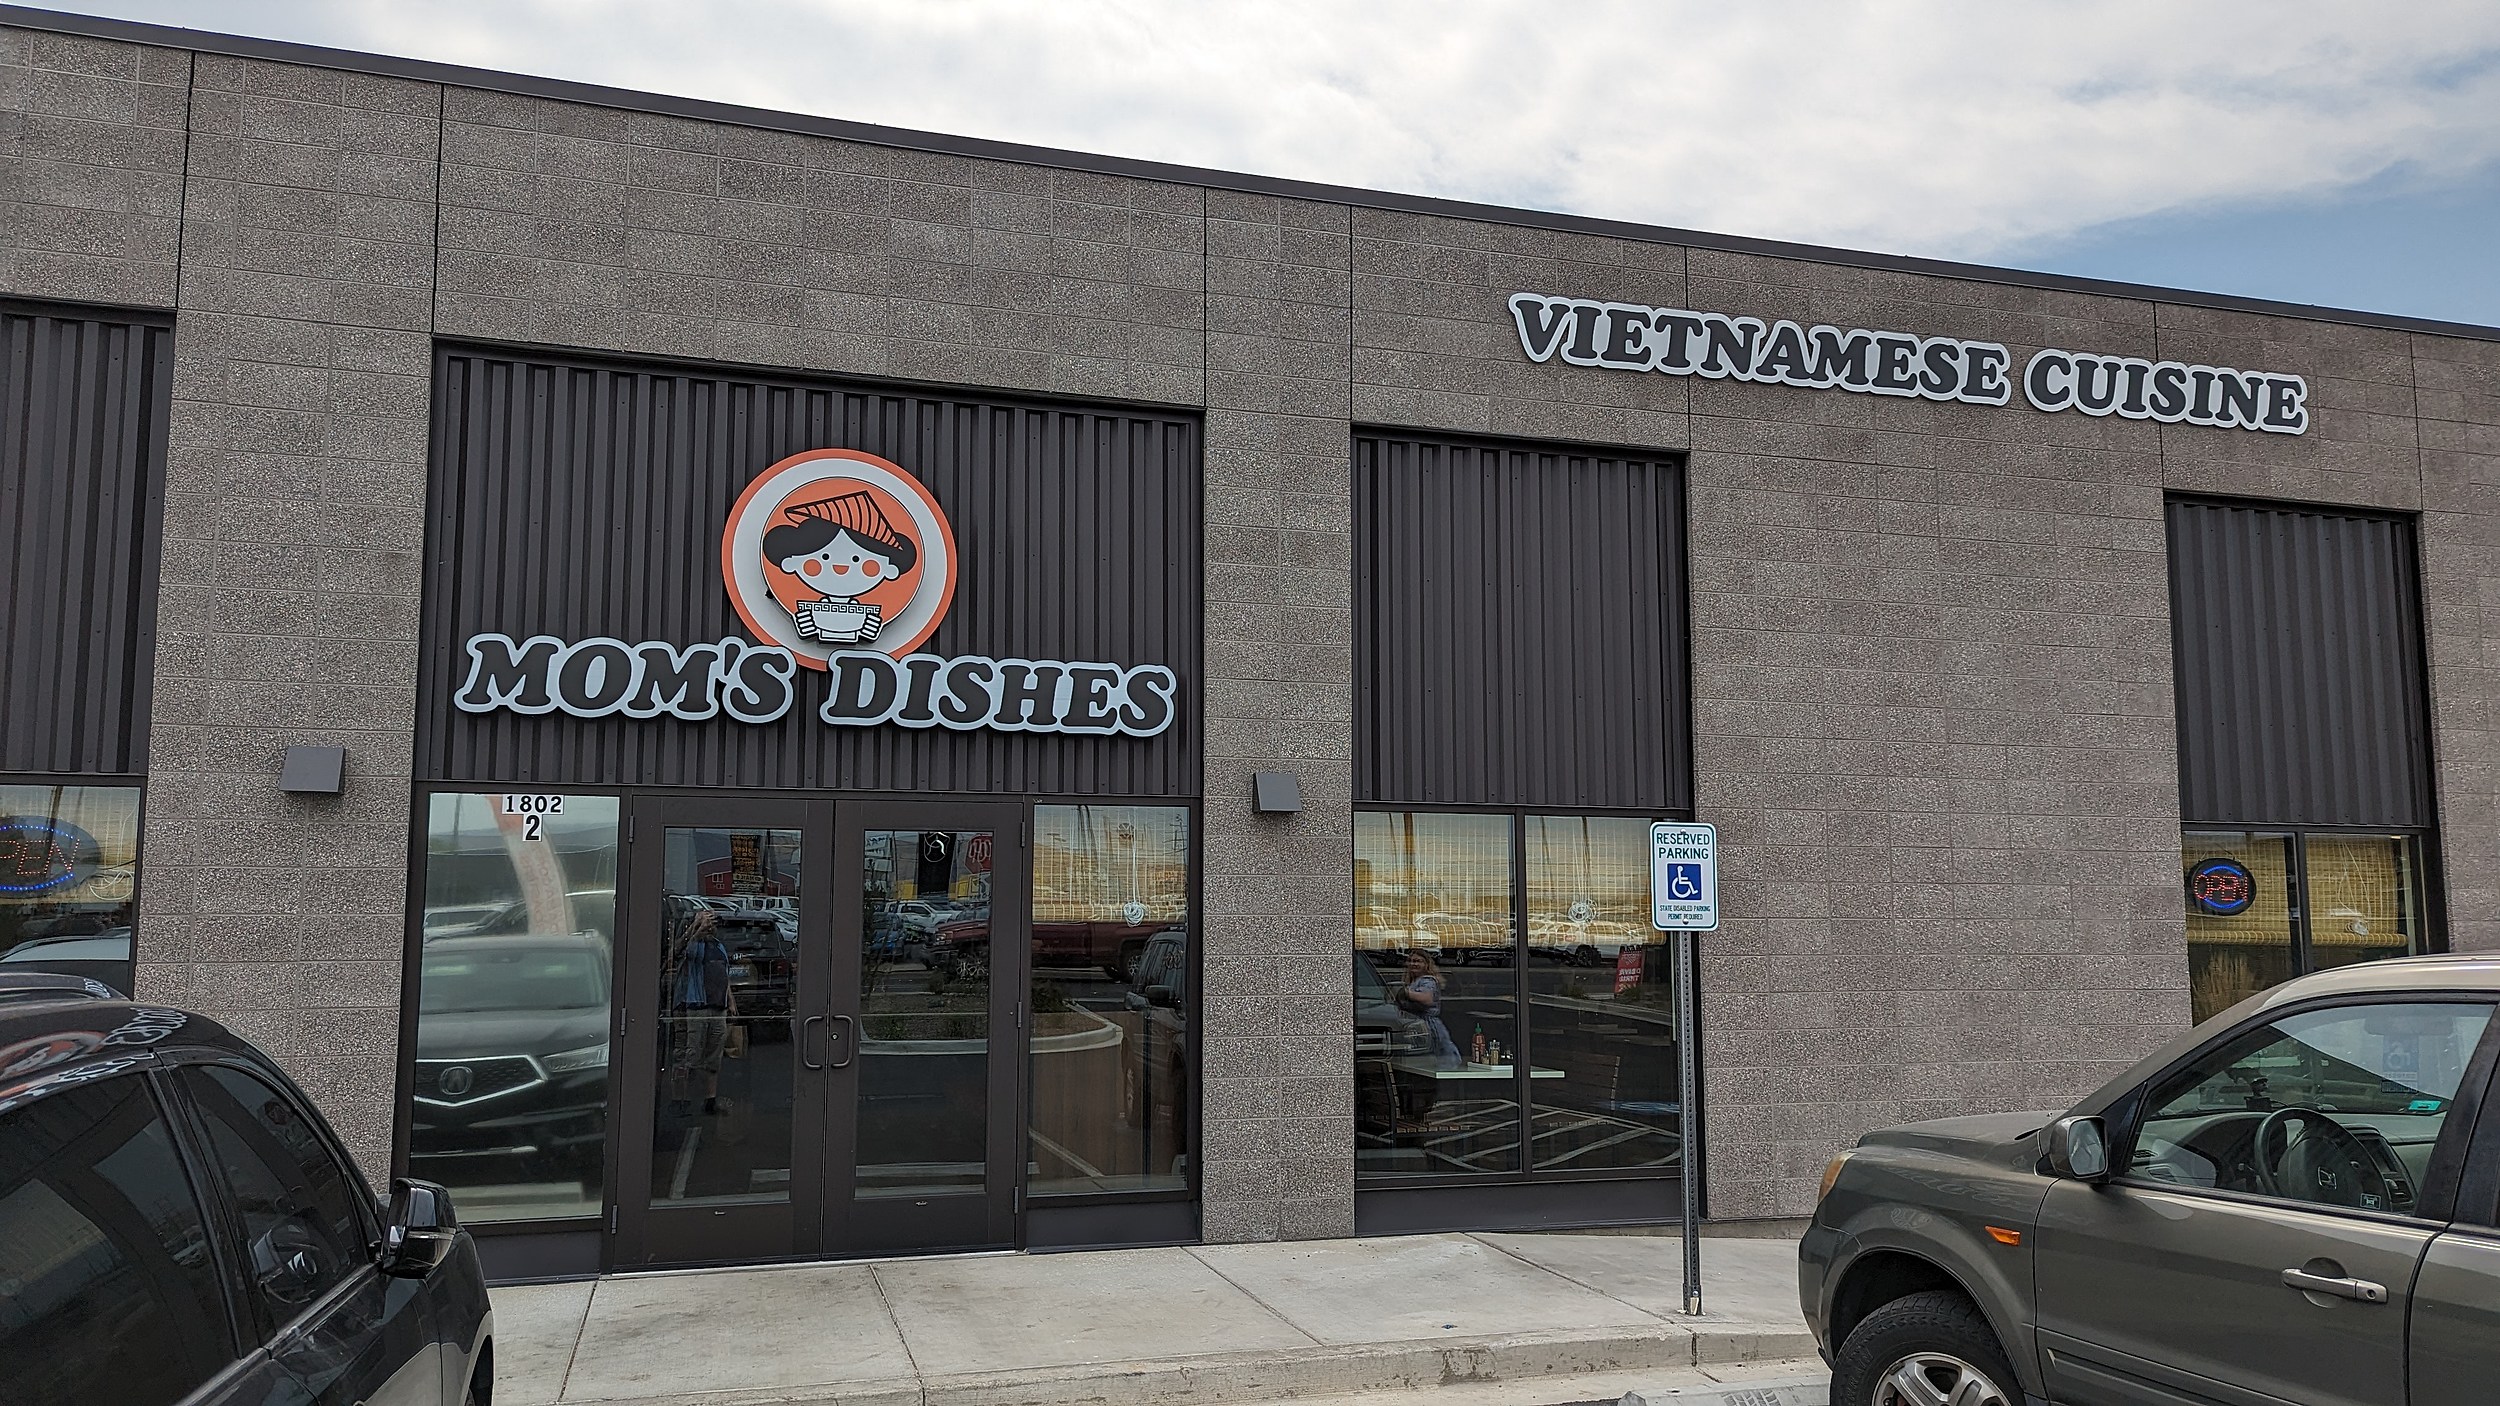 Moms Dishes Officially Open for Grand Opening Friday, Sept